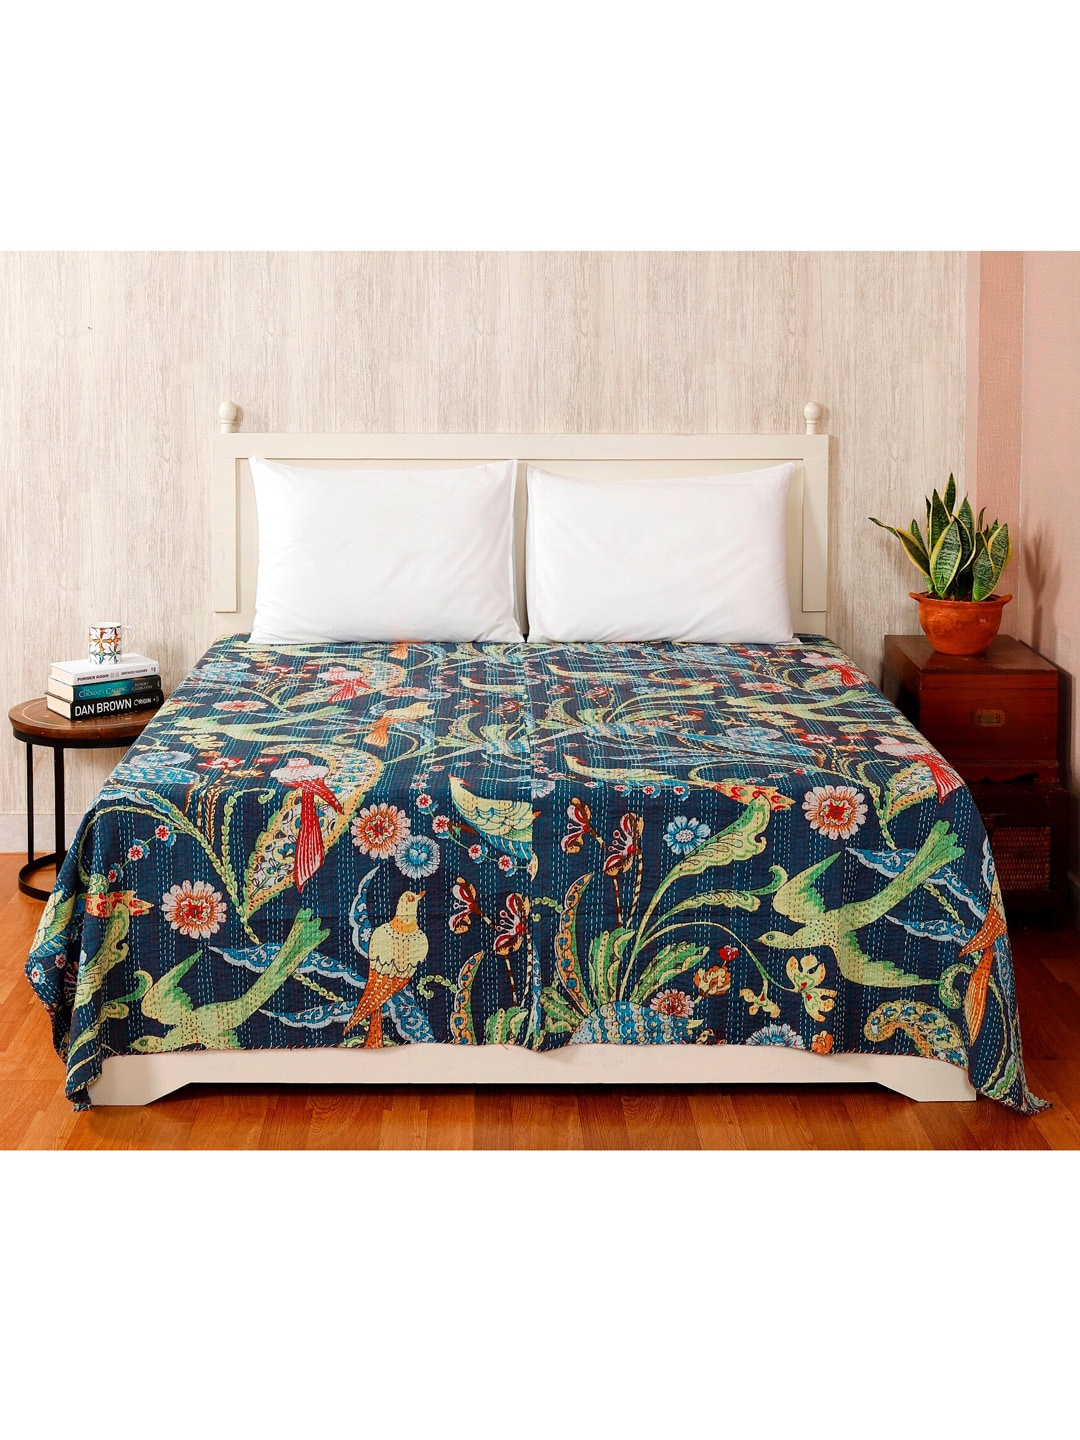 HANDICRAFT PALACE Blue Printed Kantha Embroidered Cotton Double Queen Bed Cover Price in India